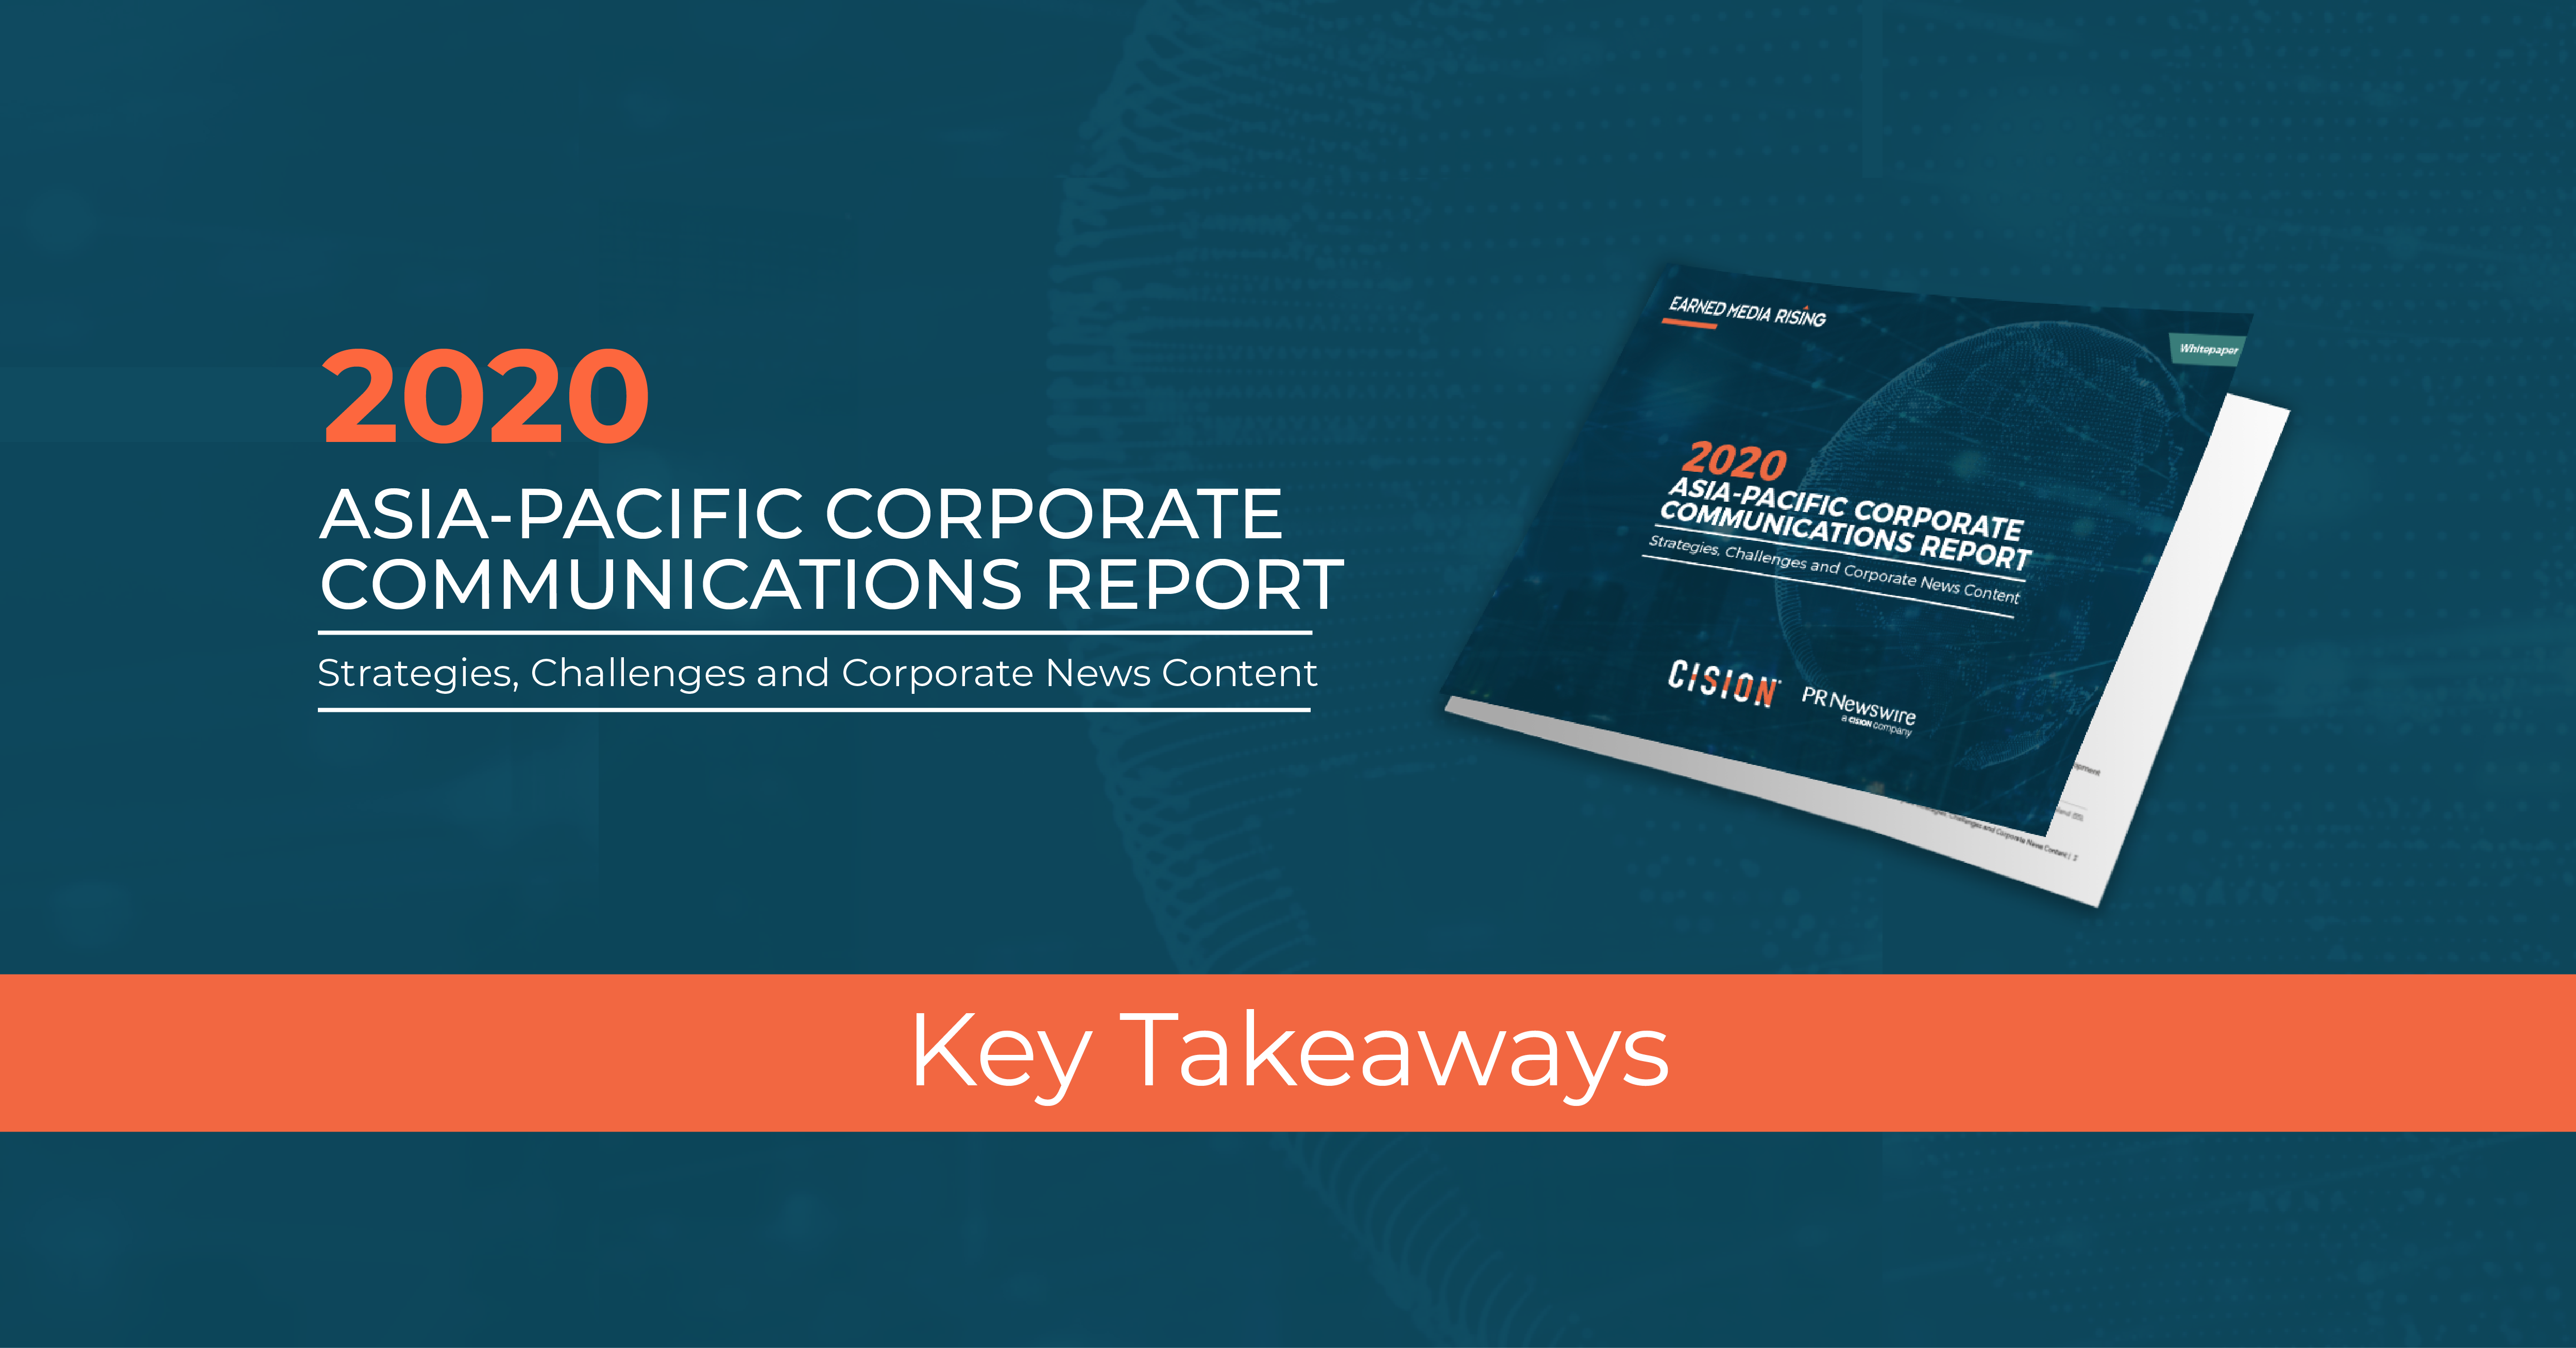 2020 Asia-Pacific Corporate Communications Report: Key Takeaways